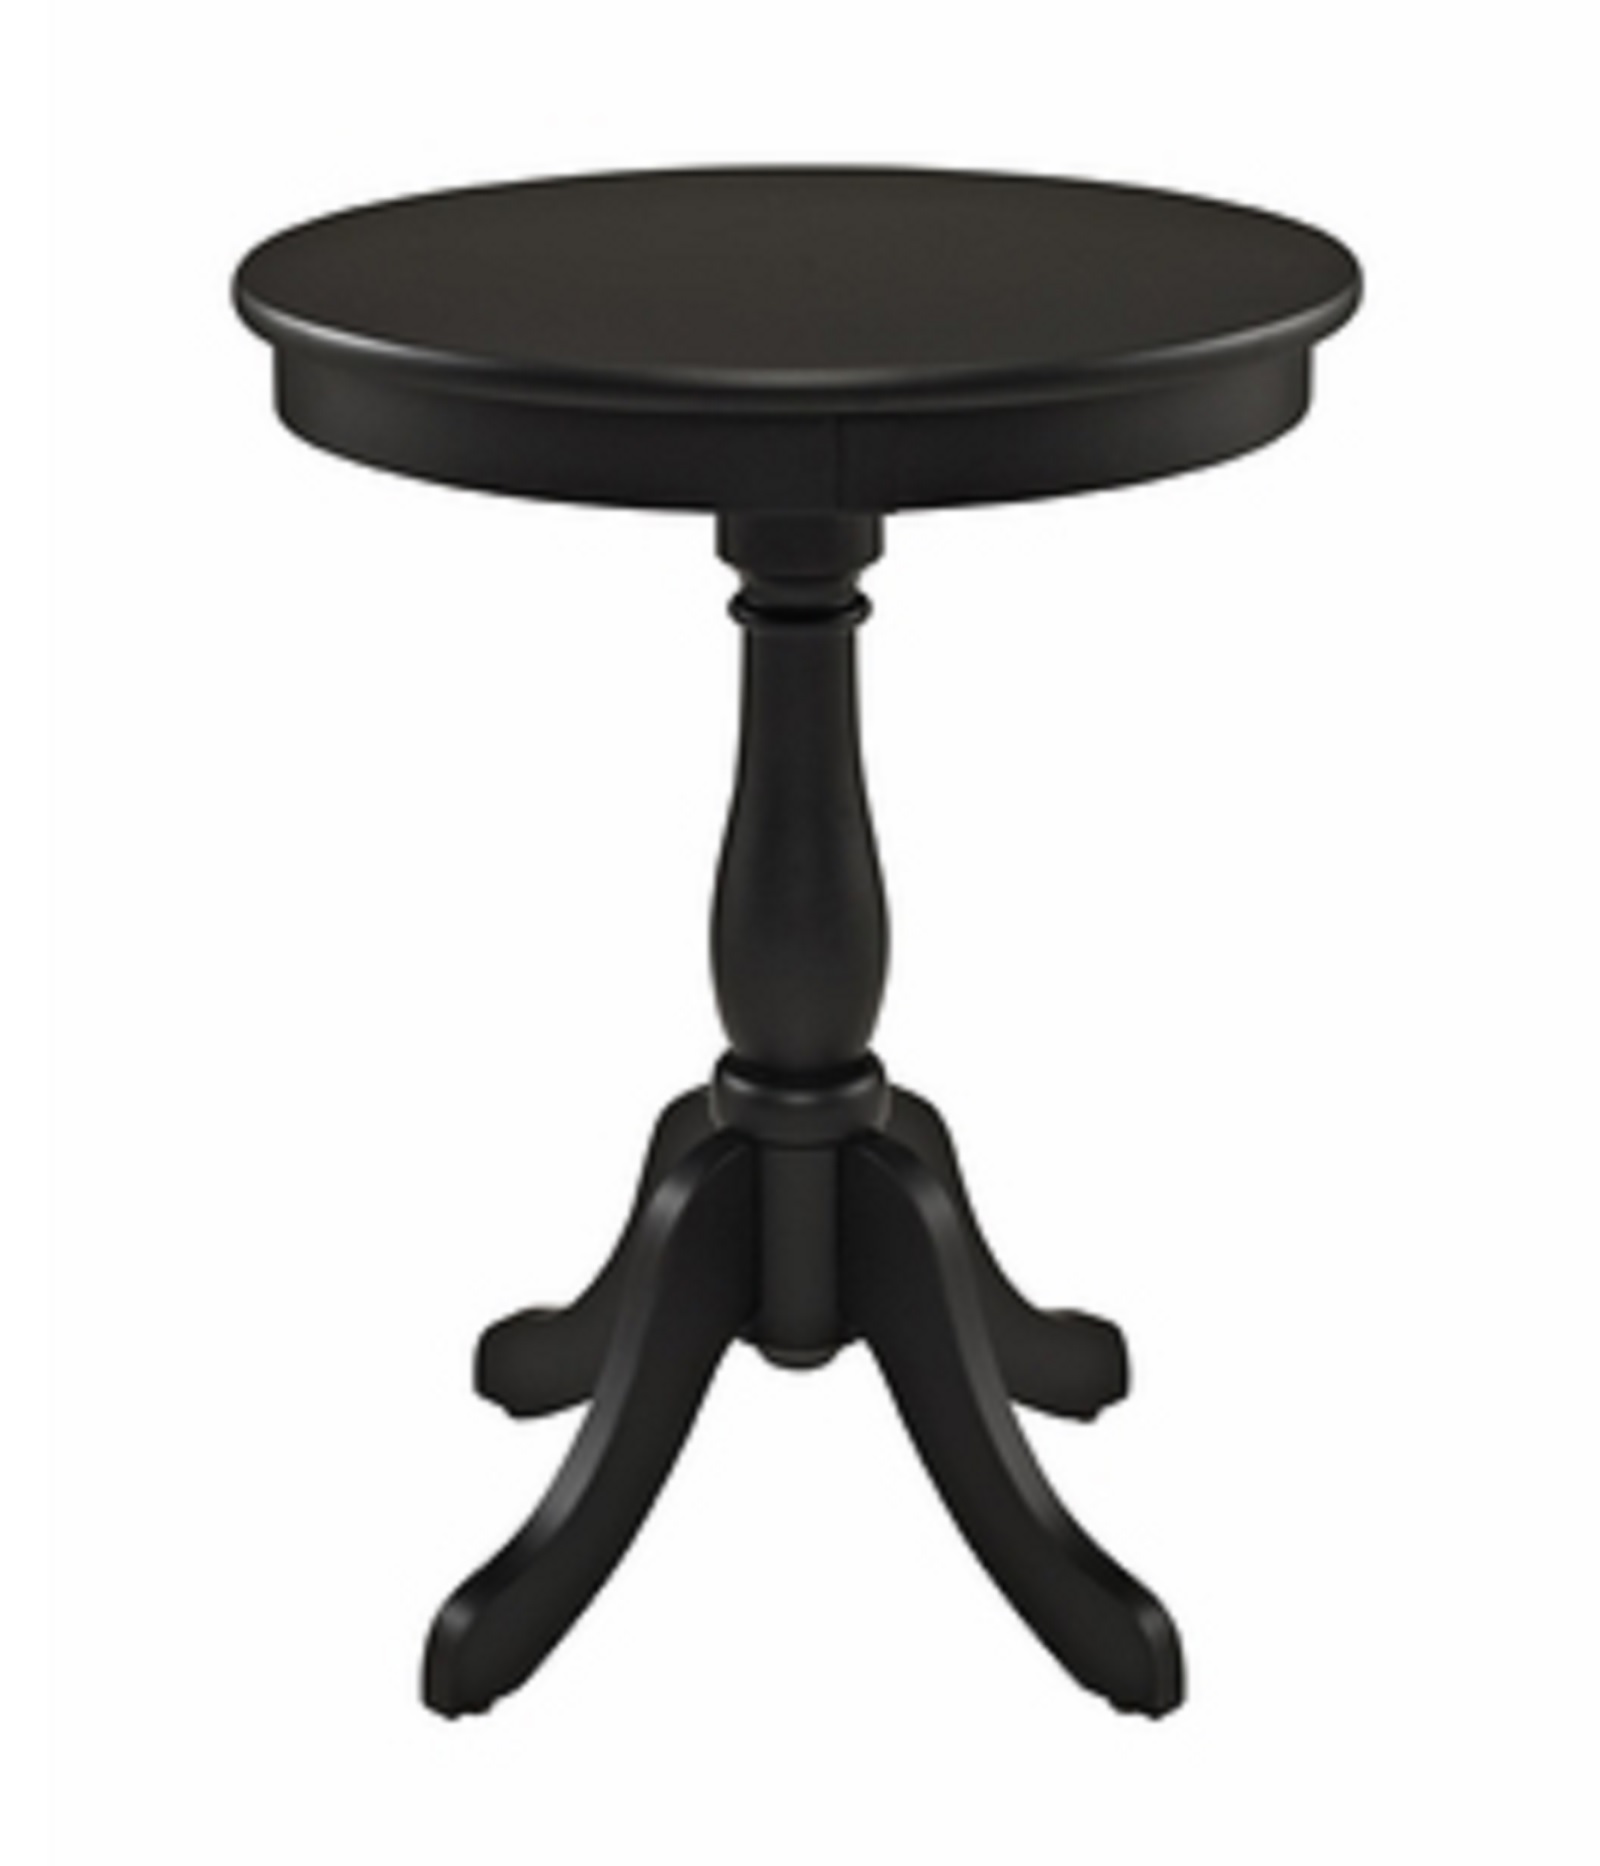 L Powell Round Black Table